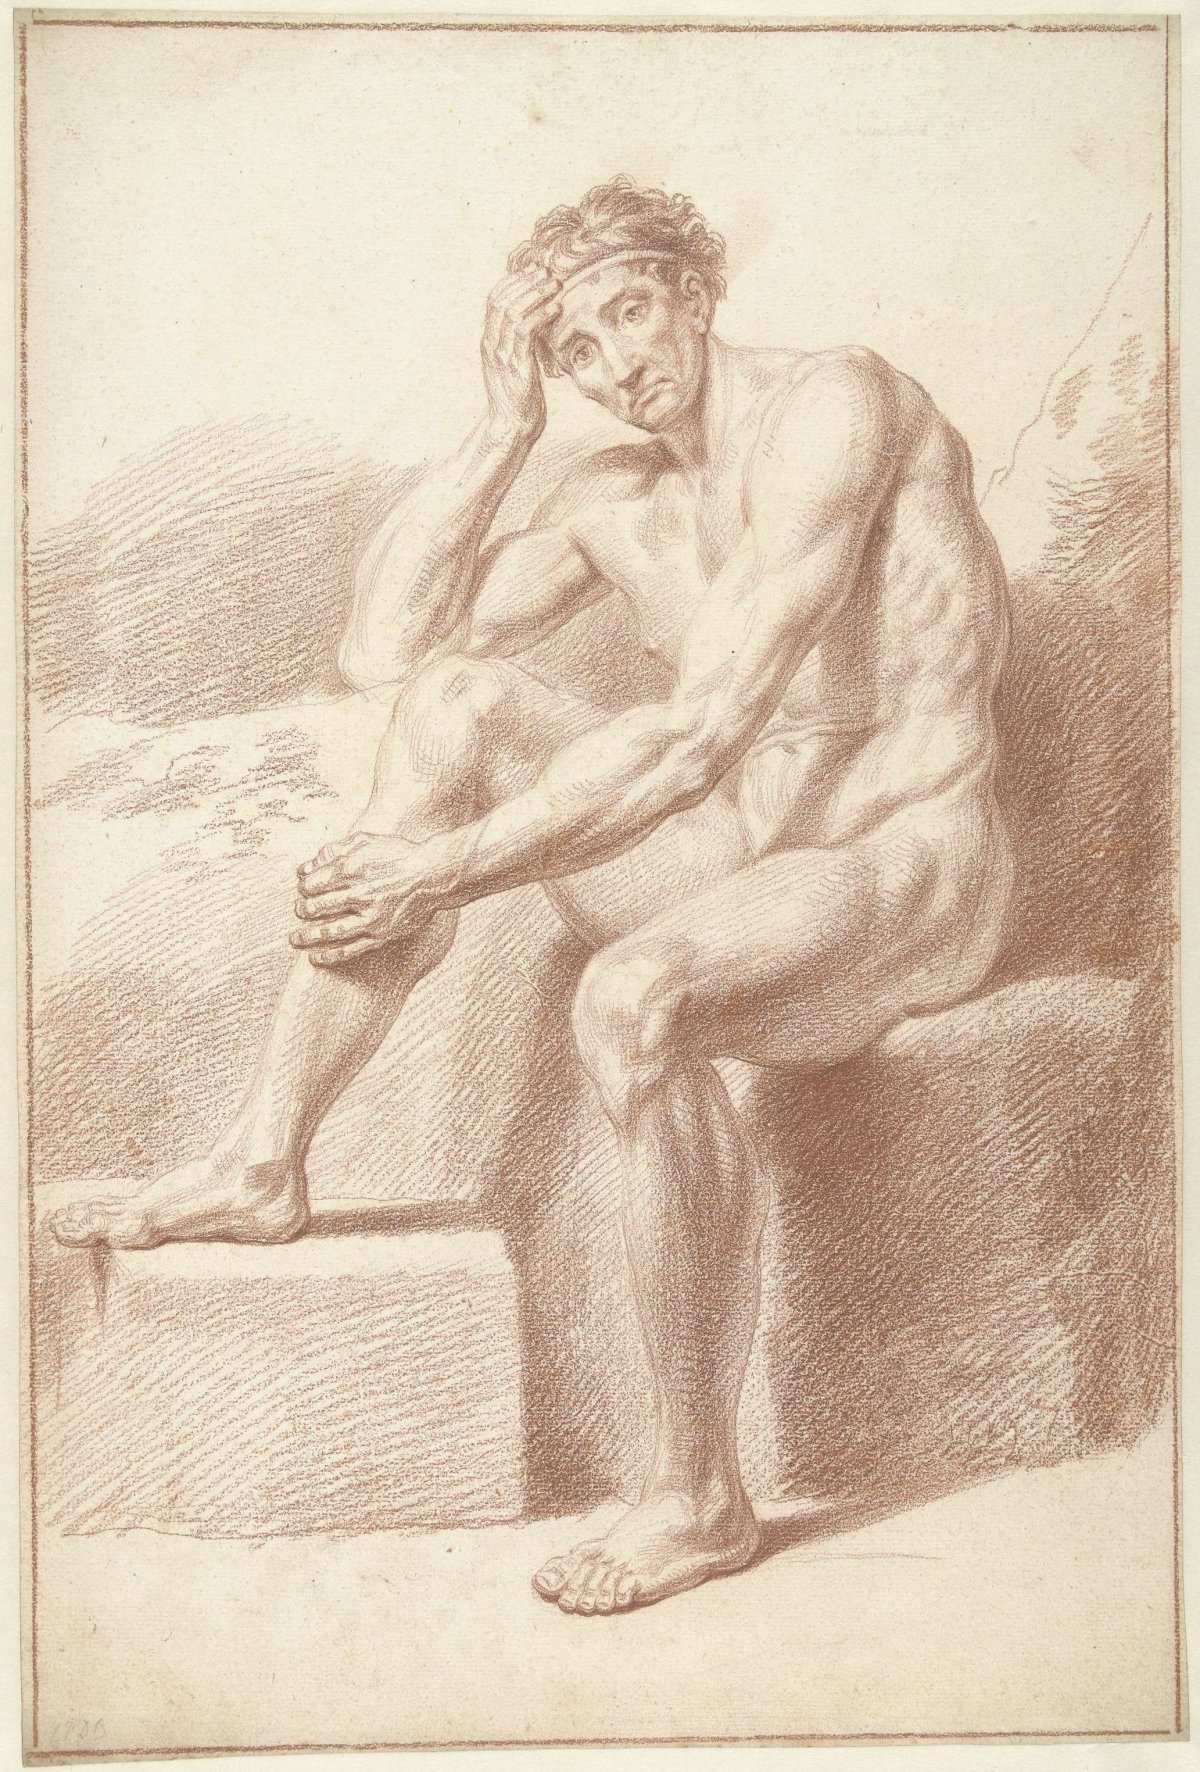 Male nude, sitting with knees raised, Louis Fabritius Dubourg, 1729